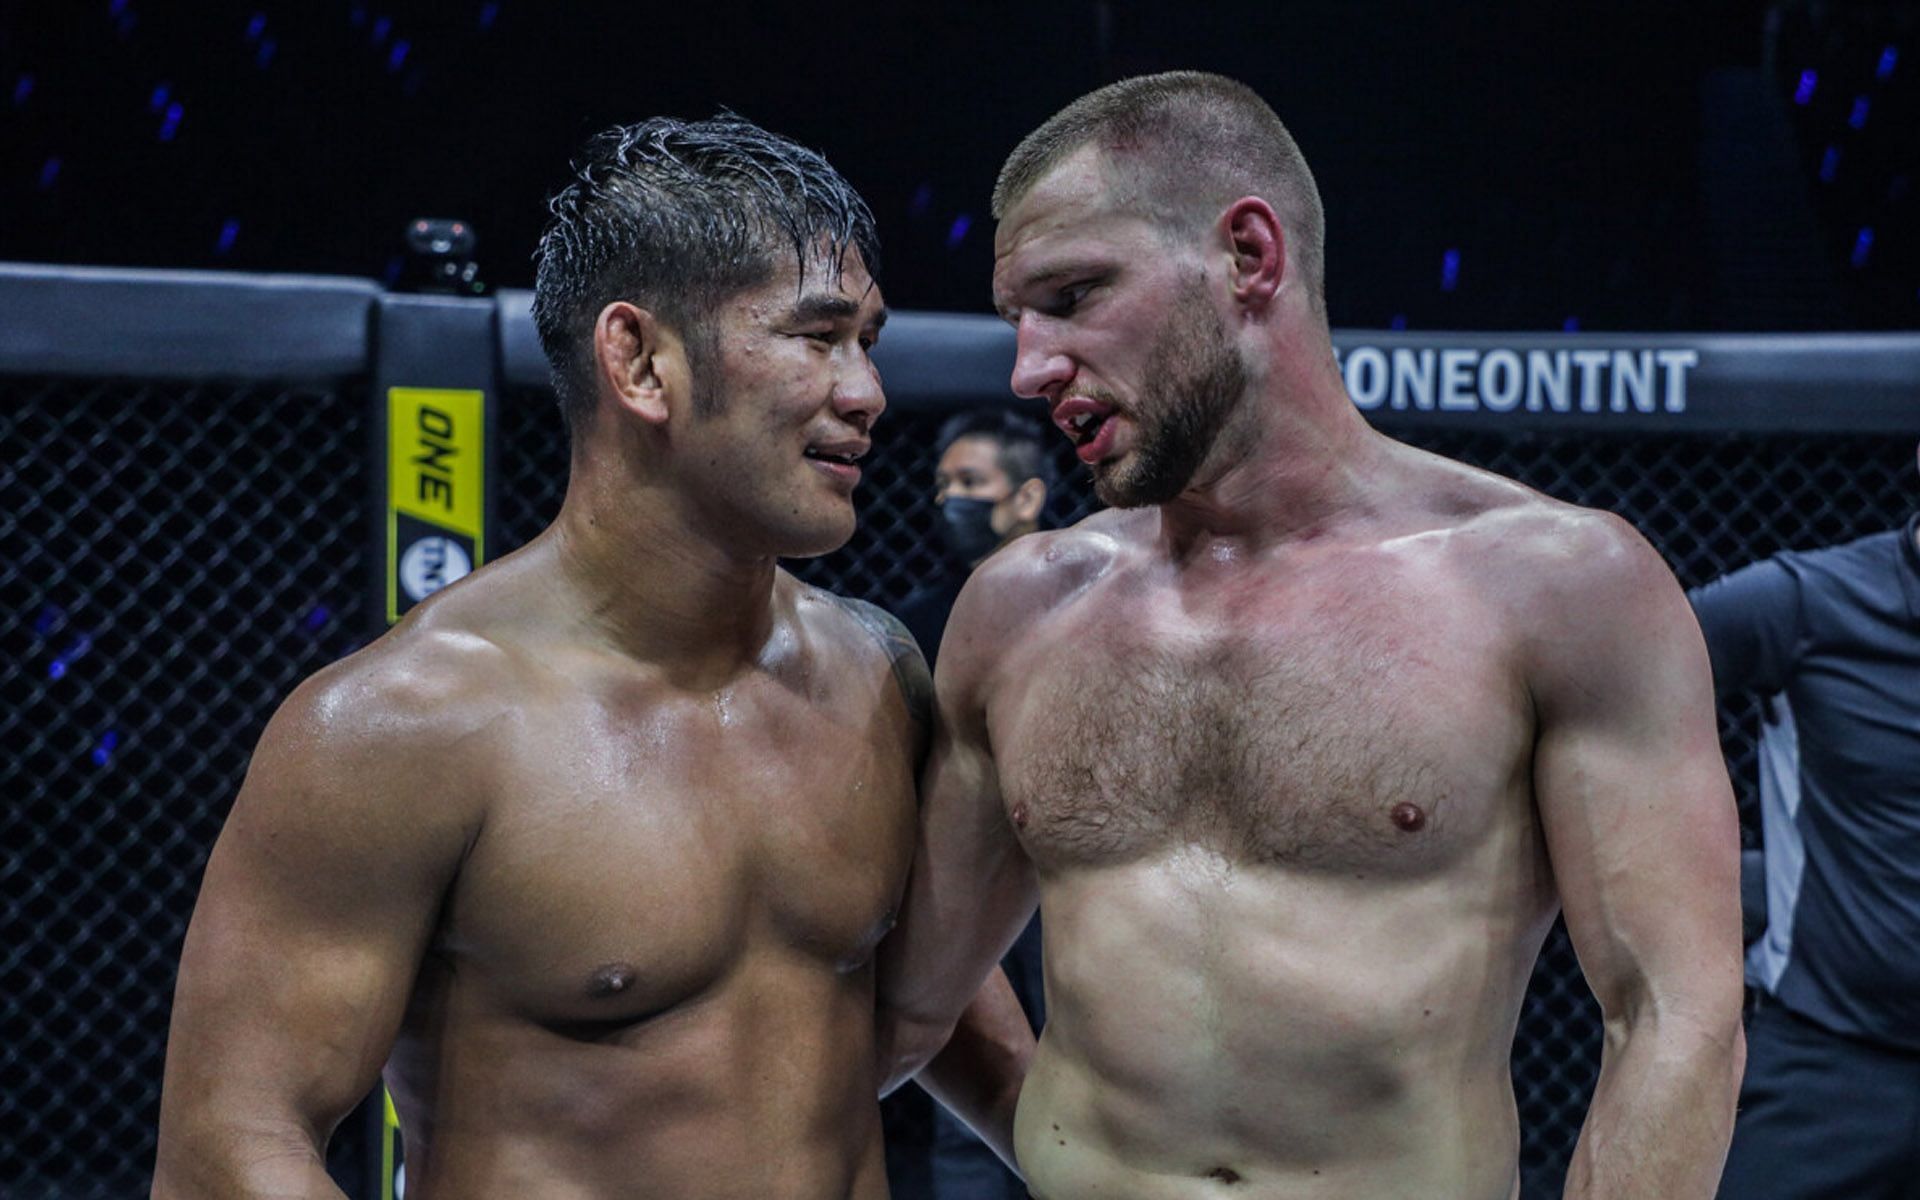 Reinier de Ridder (R) and Aung La N Sang (L) were able to revisit their rivalry in a sparring session at Sanford MMA. | [Photo: ONE Championship]